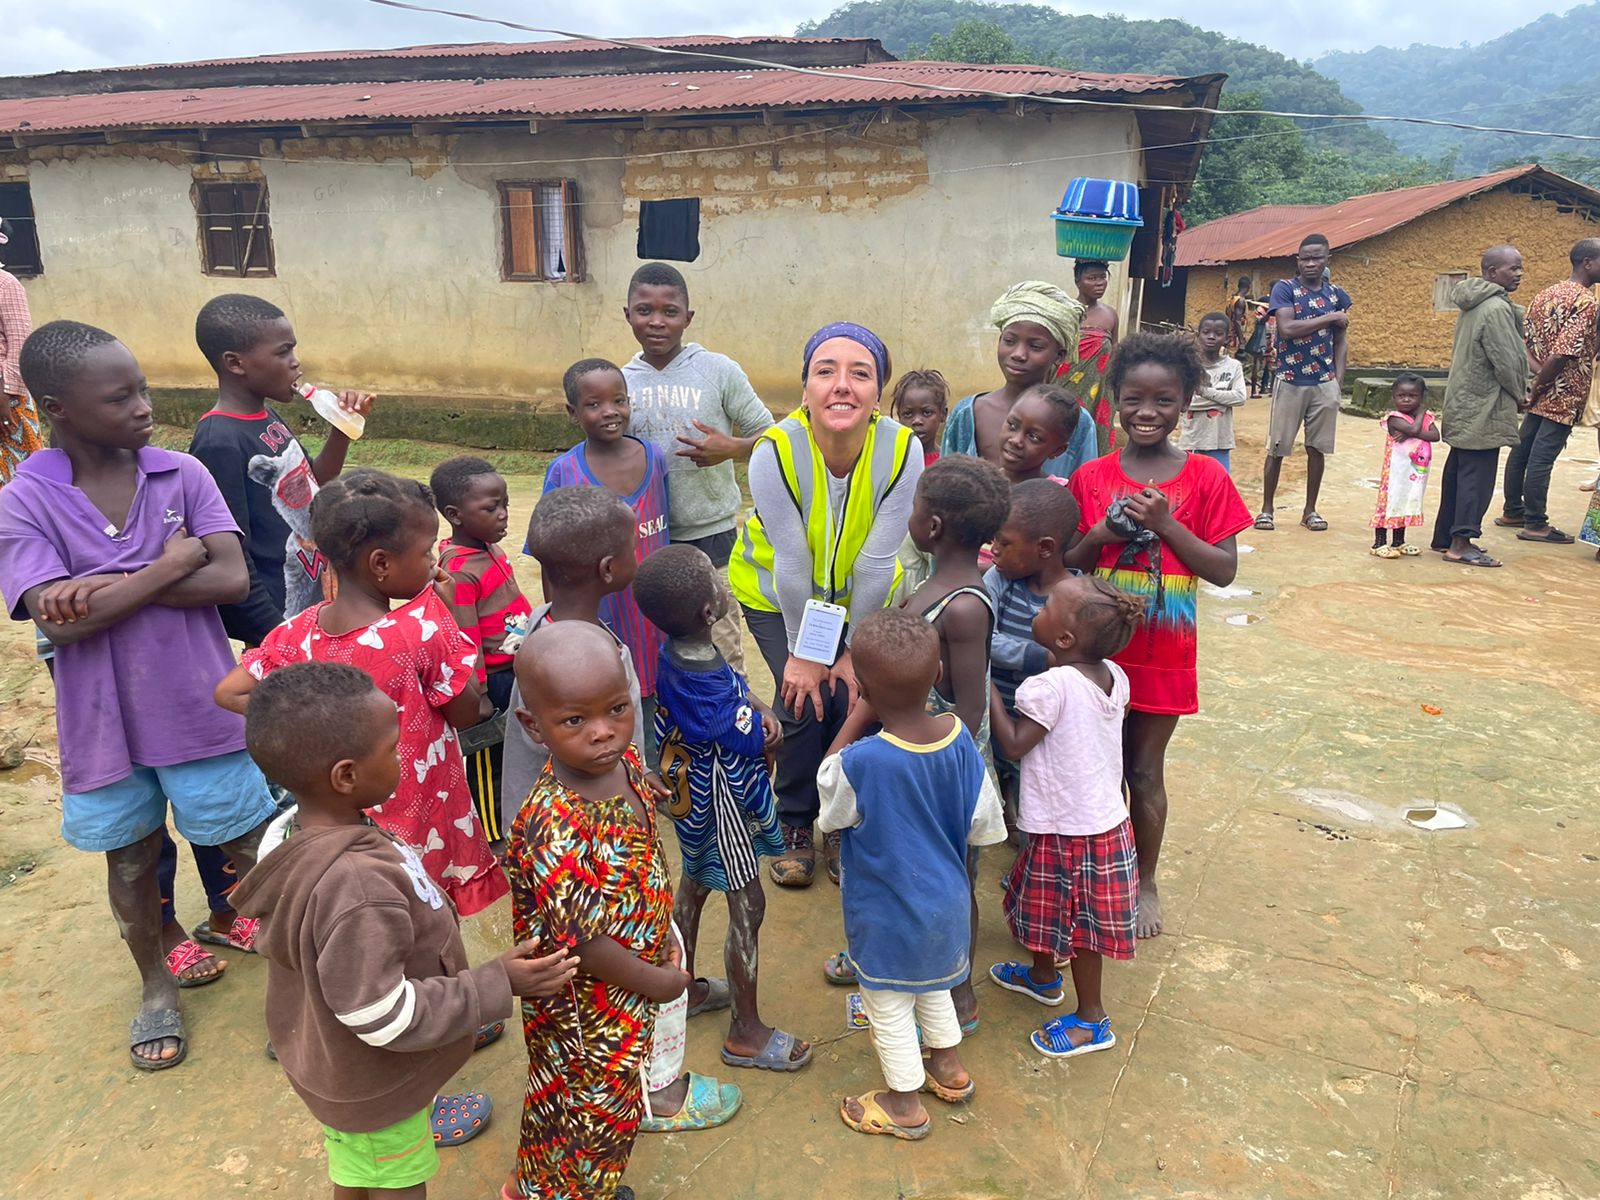 My Experience in Sierra Leone, Integration and Cultural Adaptation